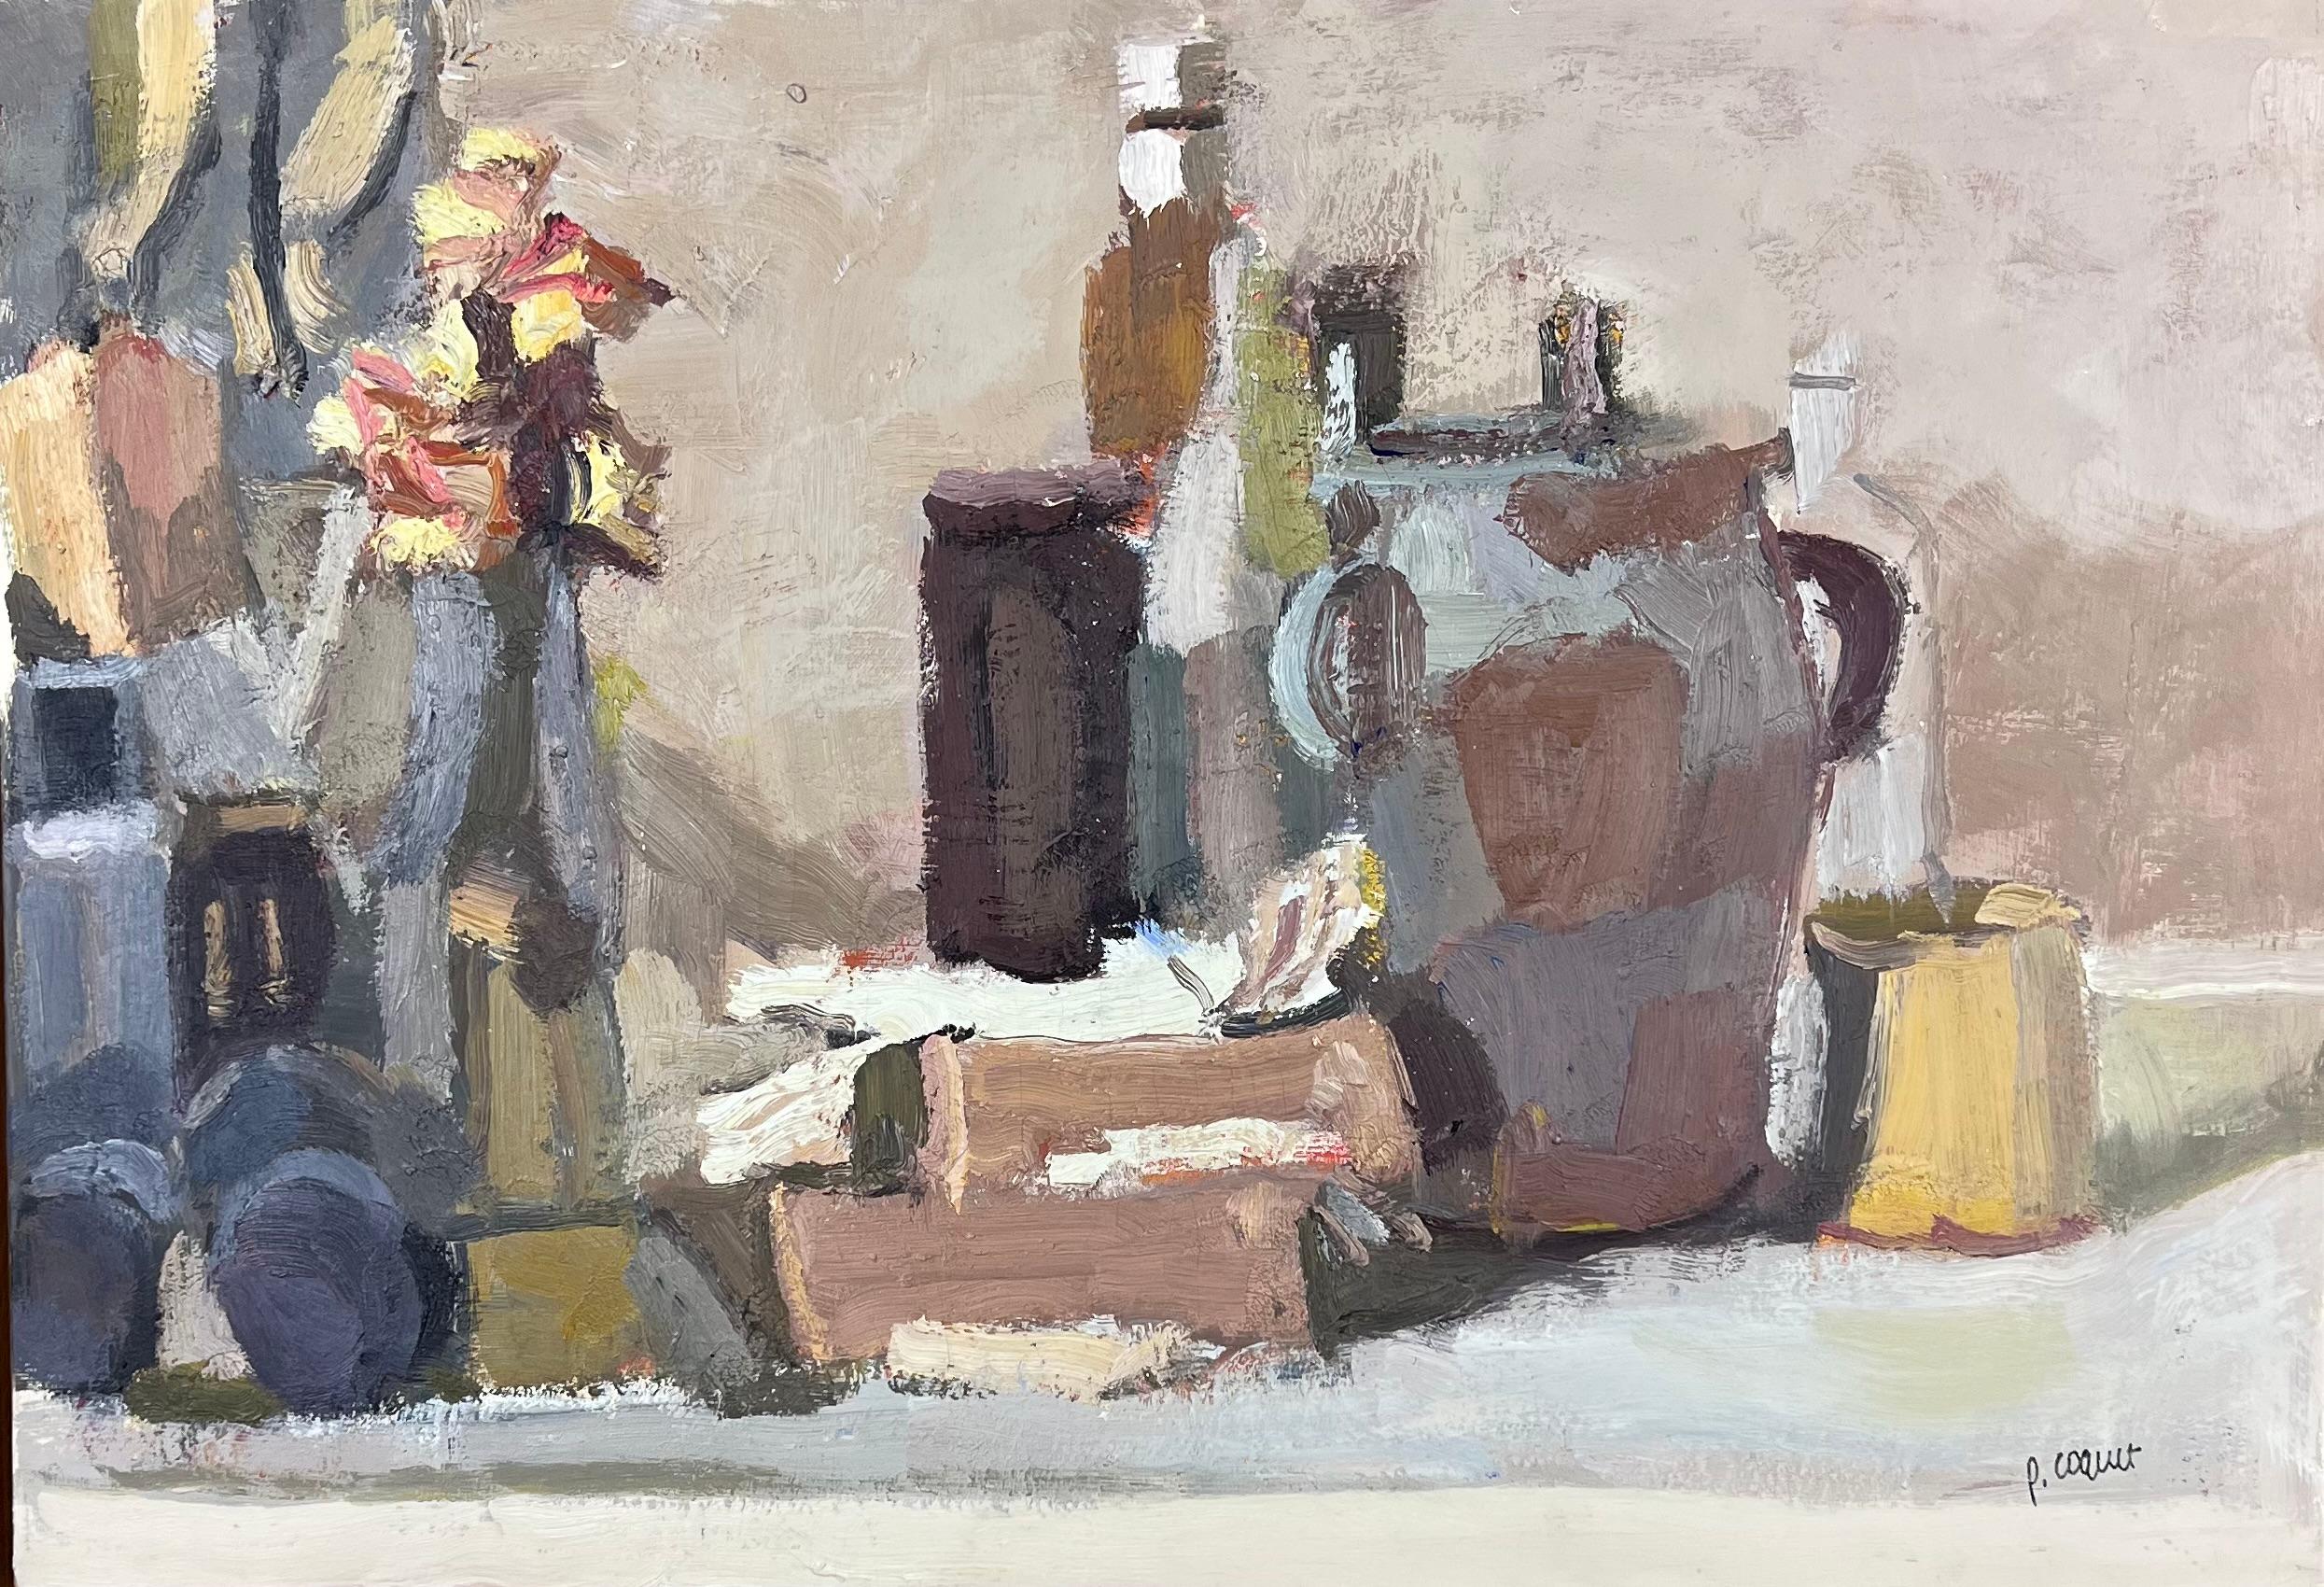 Composition with a jar, oil painting by Pierre Coquet
Reference number F488
Framed with a natural oak floated frame
48 x 70 x 2 cm (53 x 75 x 3,5 cm frame included)
This work is painted with oil on a paper that is laid on a canvas and placed in a